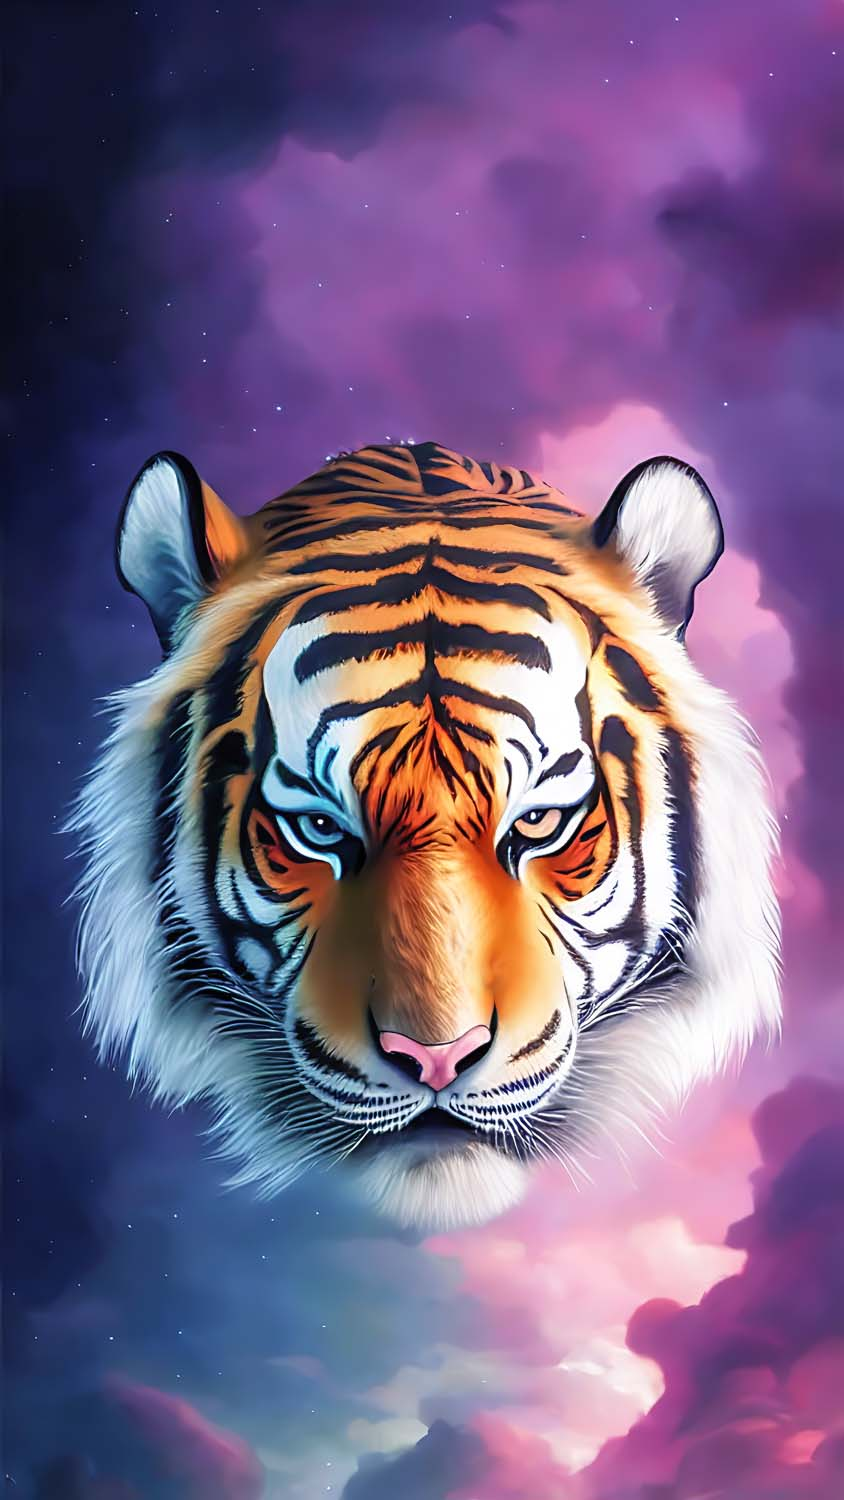 The Tiger Art IPhone Wallpaper HD  IPhone Wallpapers